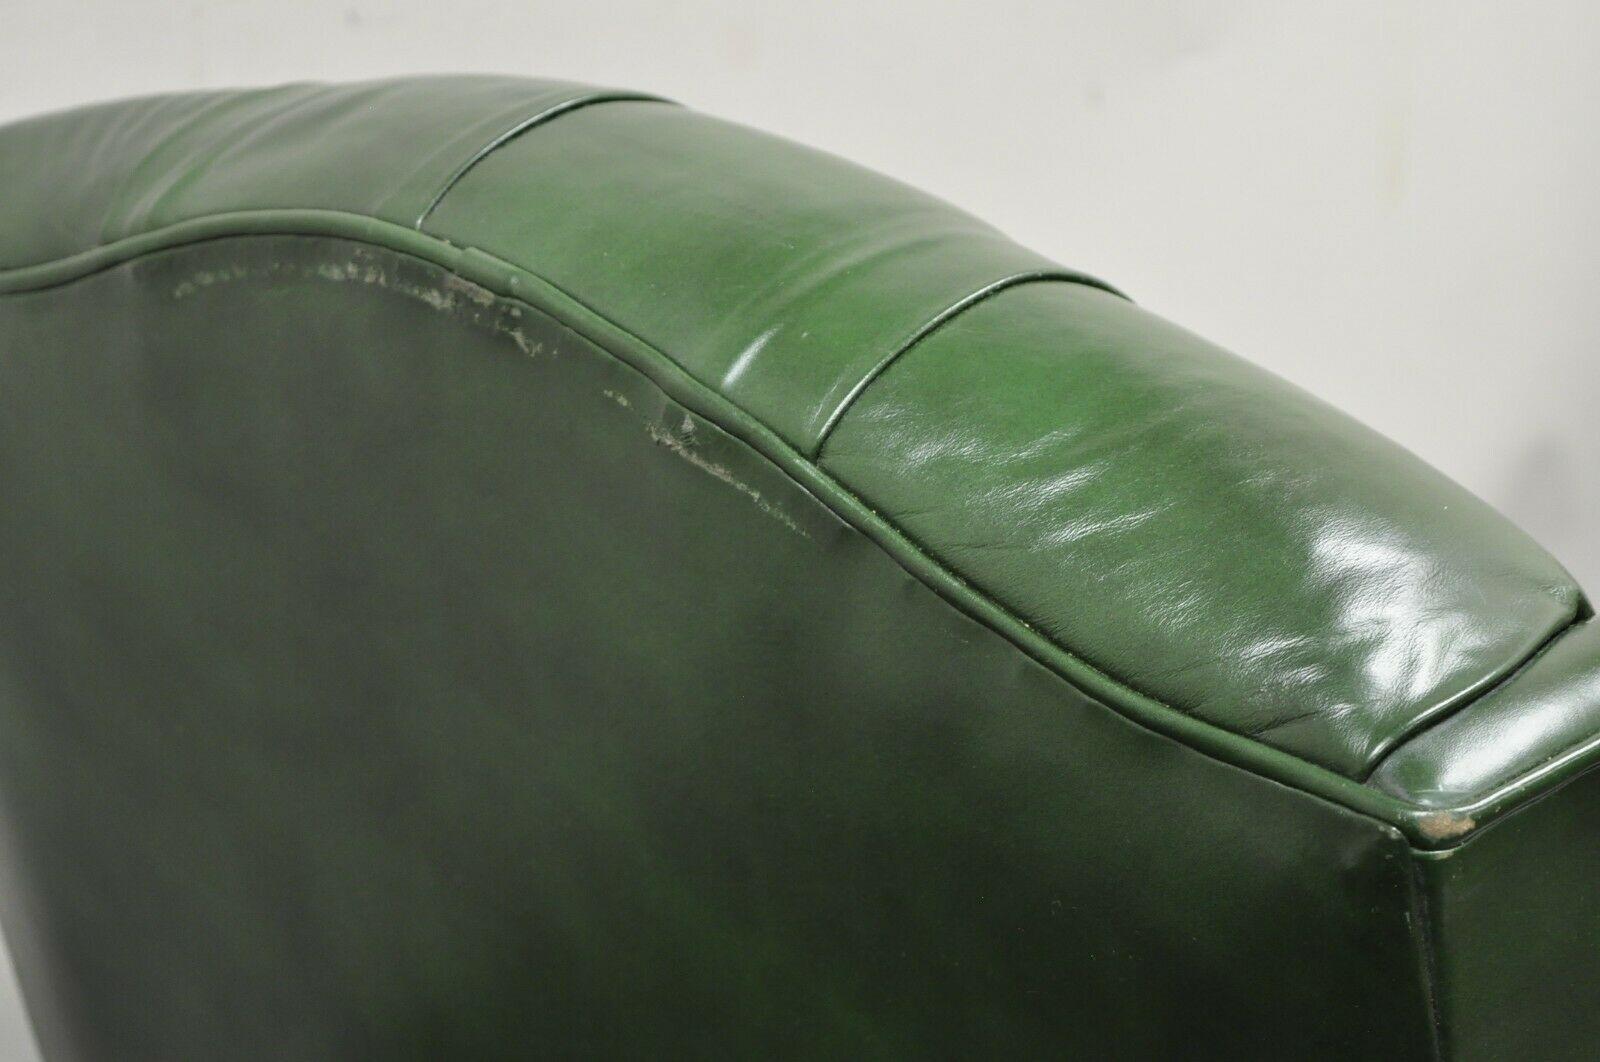 Mahogany Bradington Young Green Leather Chesterfield Reclining Wingback Chairs - a Pair